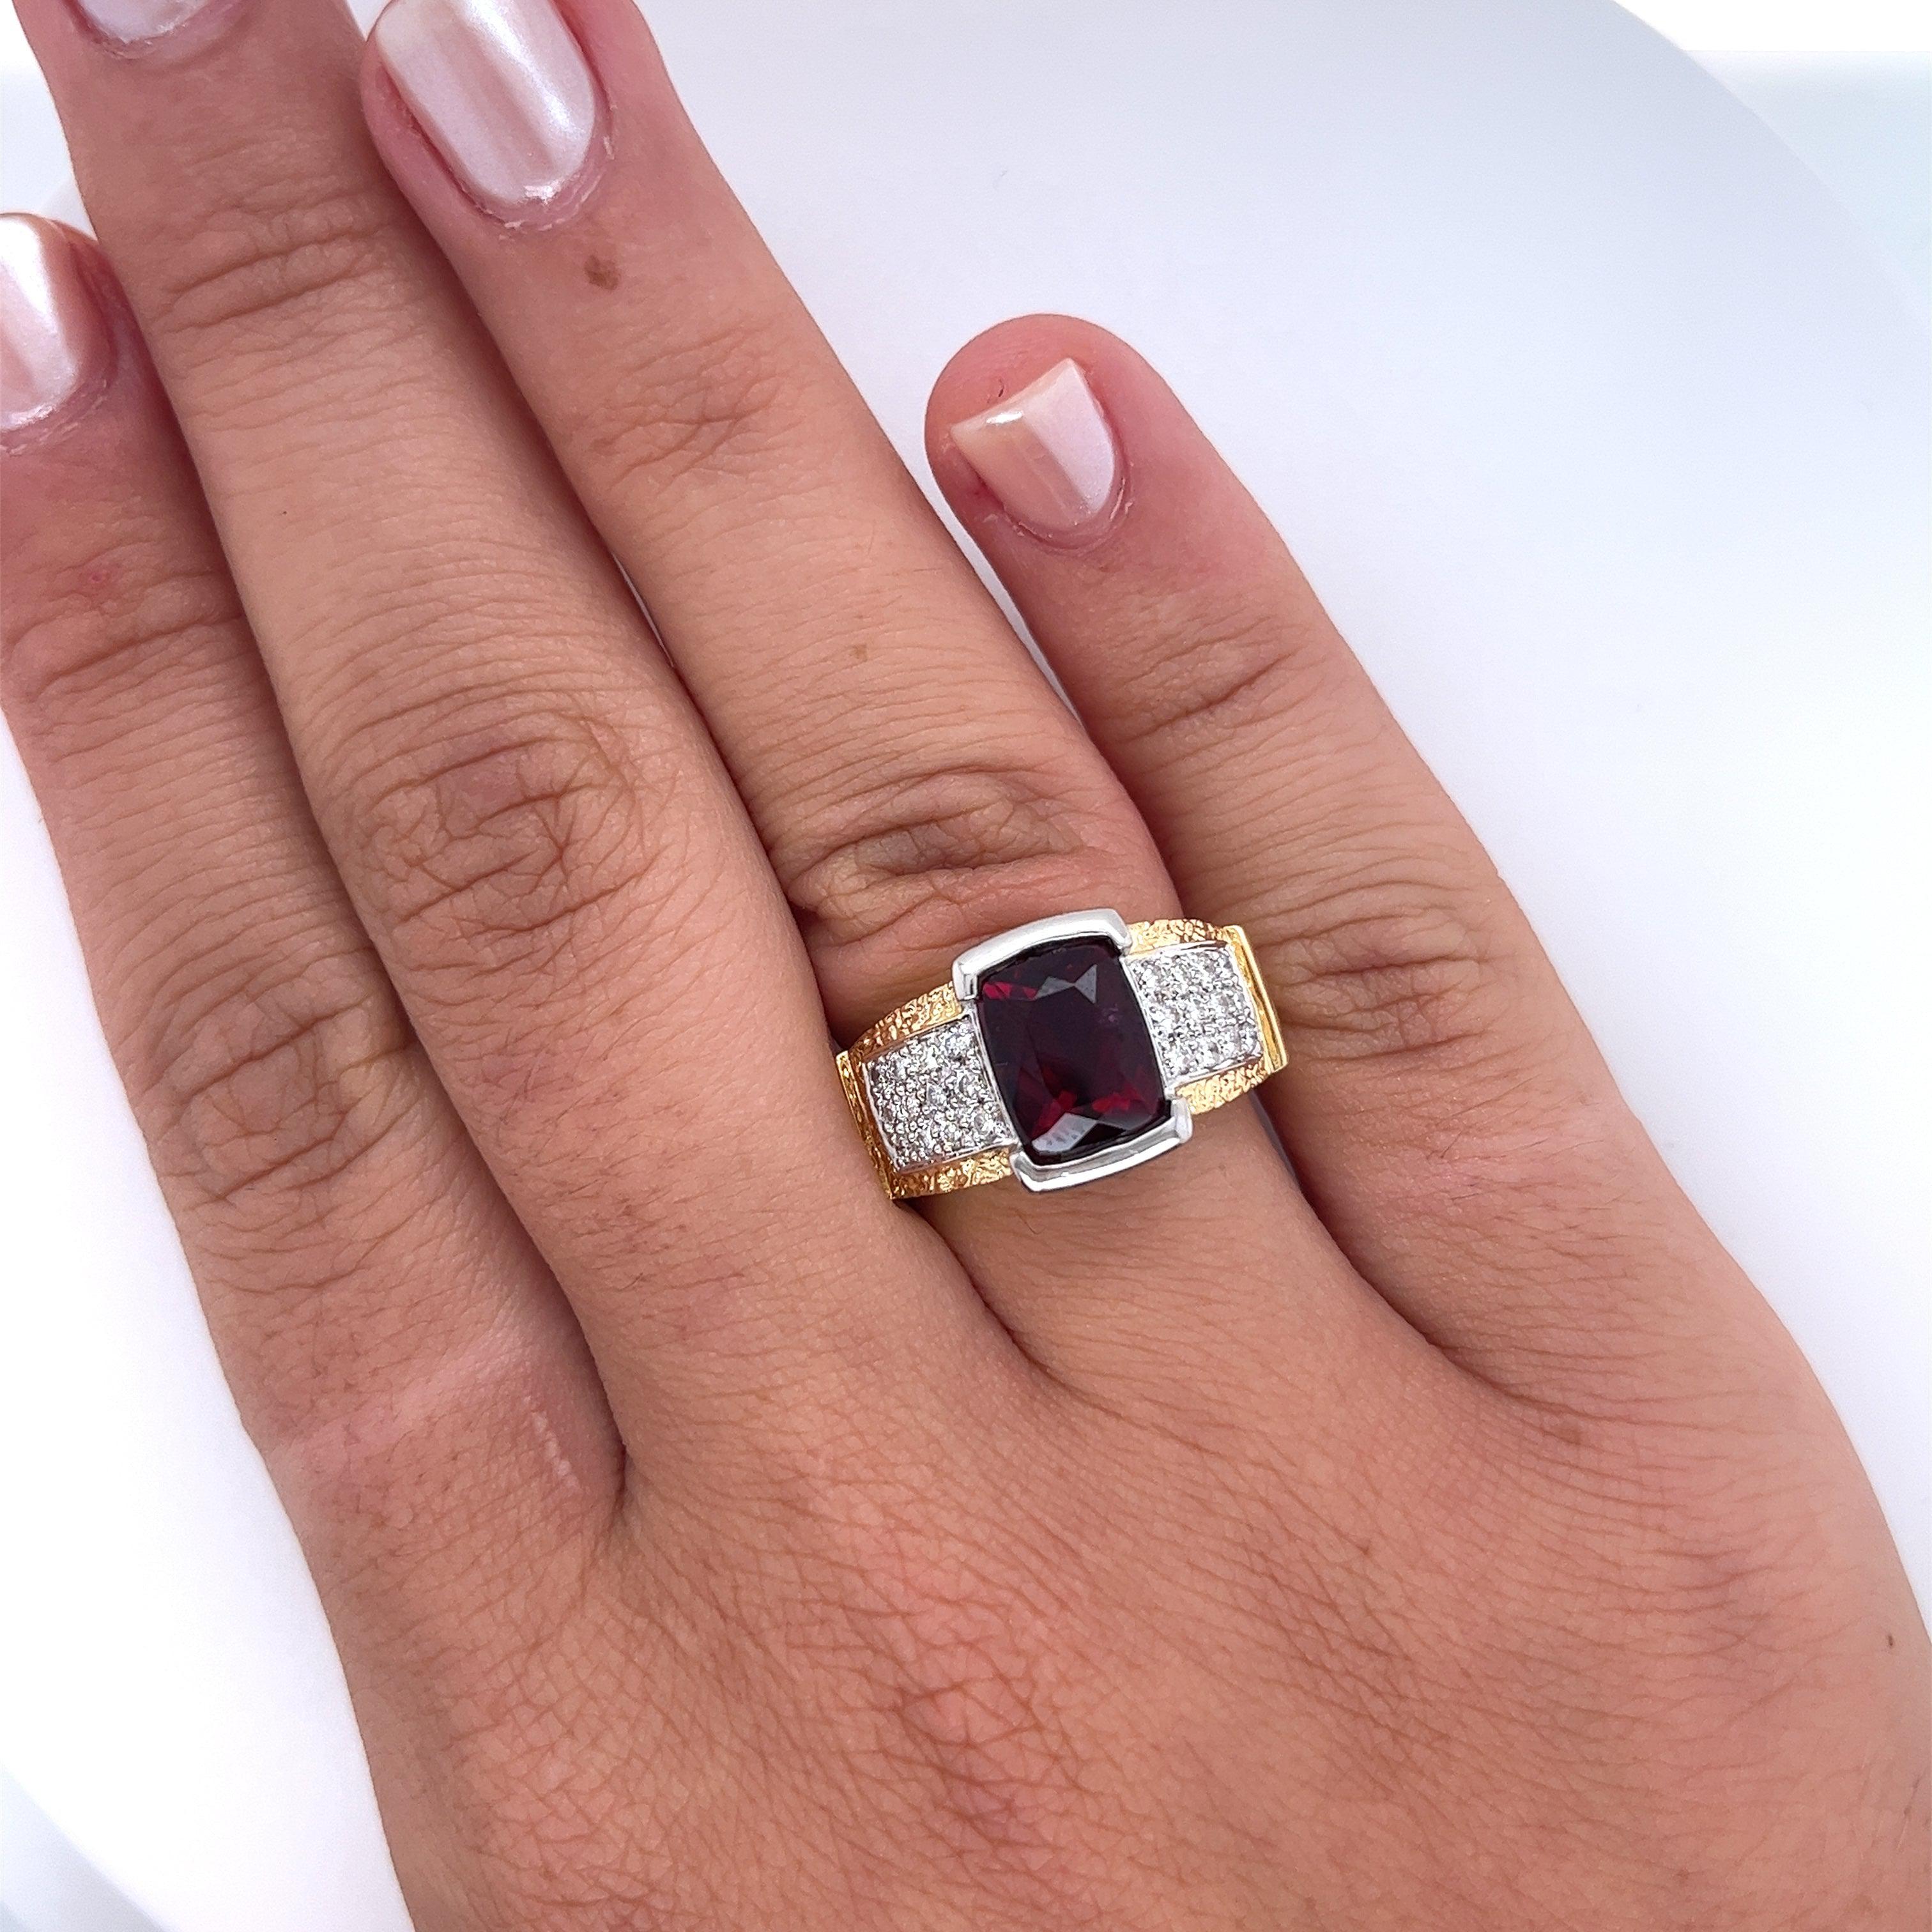 Vintage Radiant Cut 4.50 Carat Red Rubellite Tourmaline and Diamond Ring in Platinum and 18K Gold-Semi Precious Jewelry-ASSAY